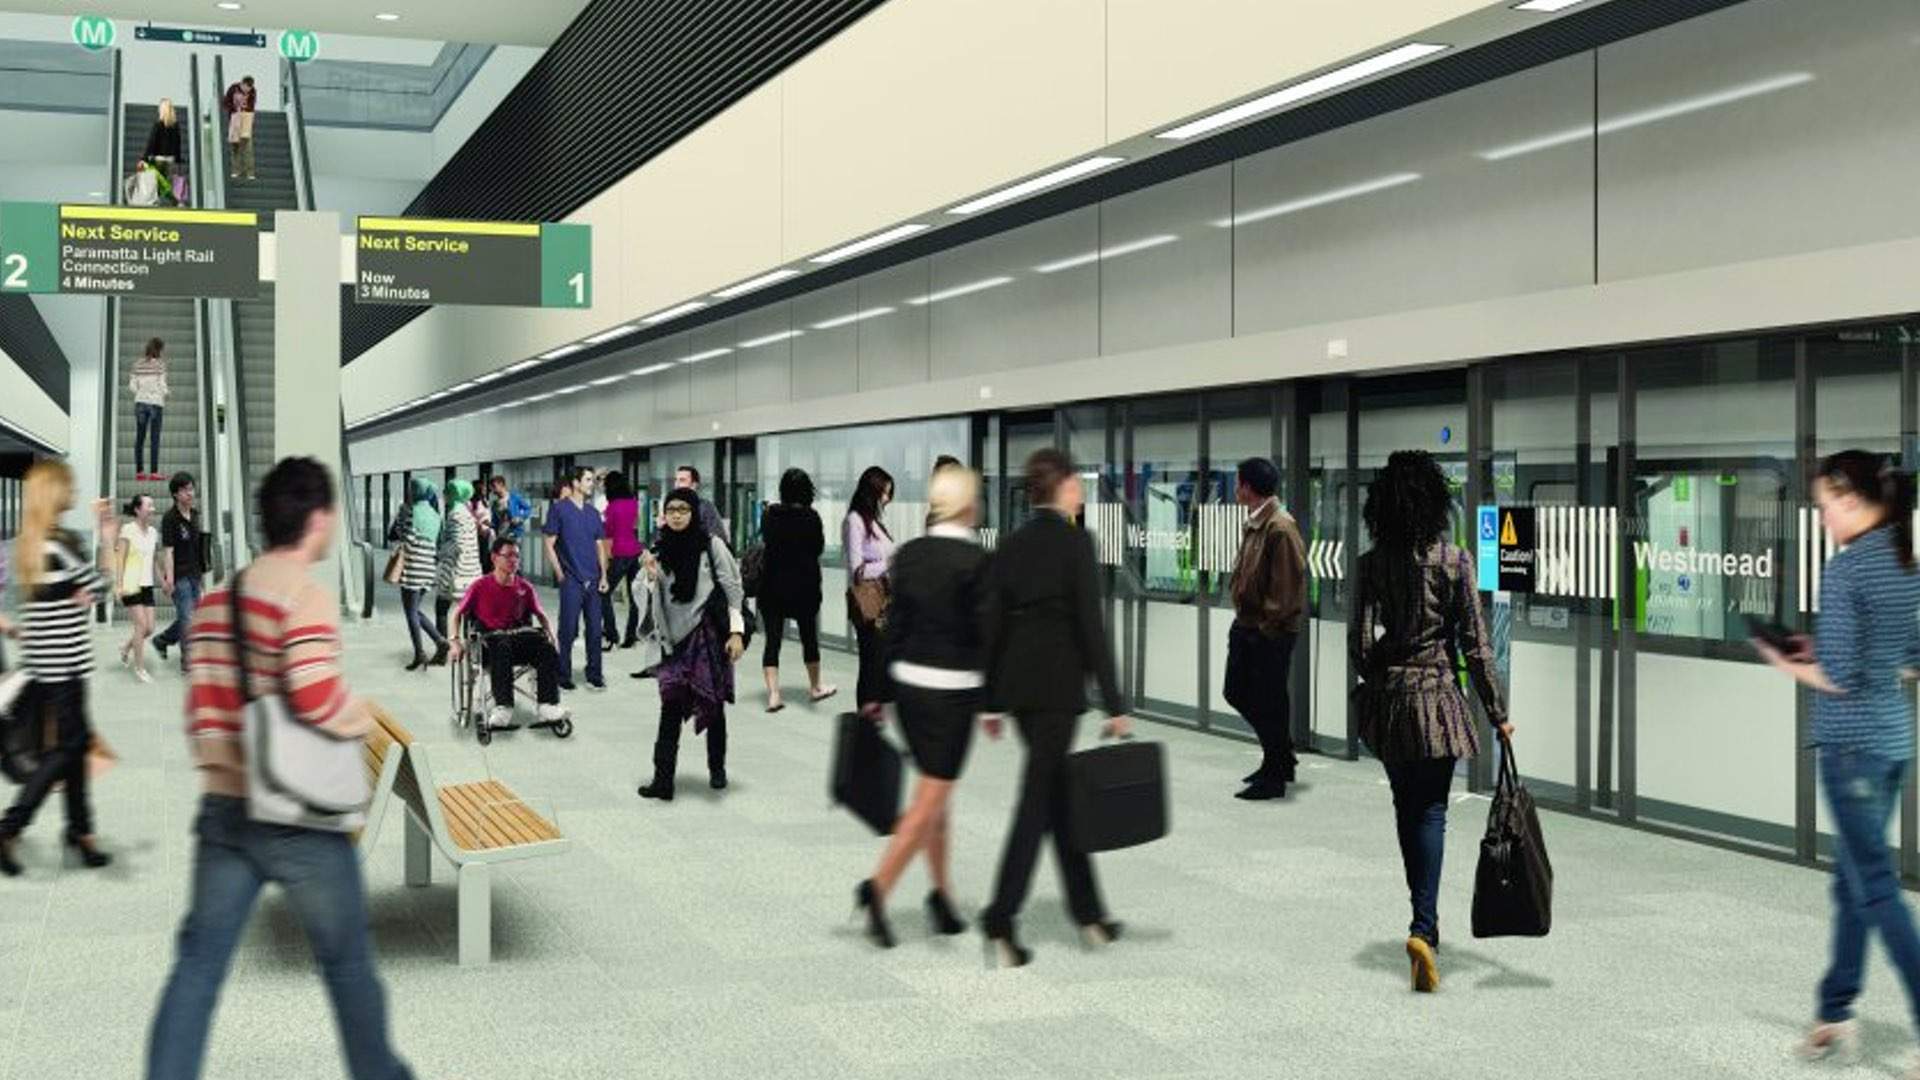 Sydney's High-Speed Underground Train to Parramatta Is One Step Closer to Actually Happening